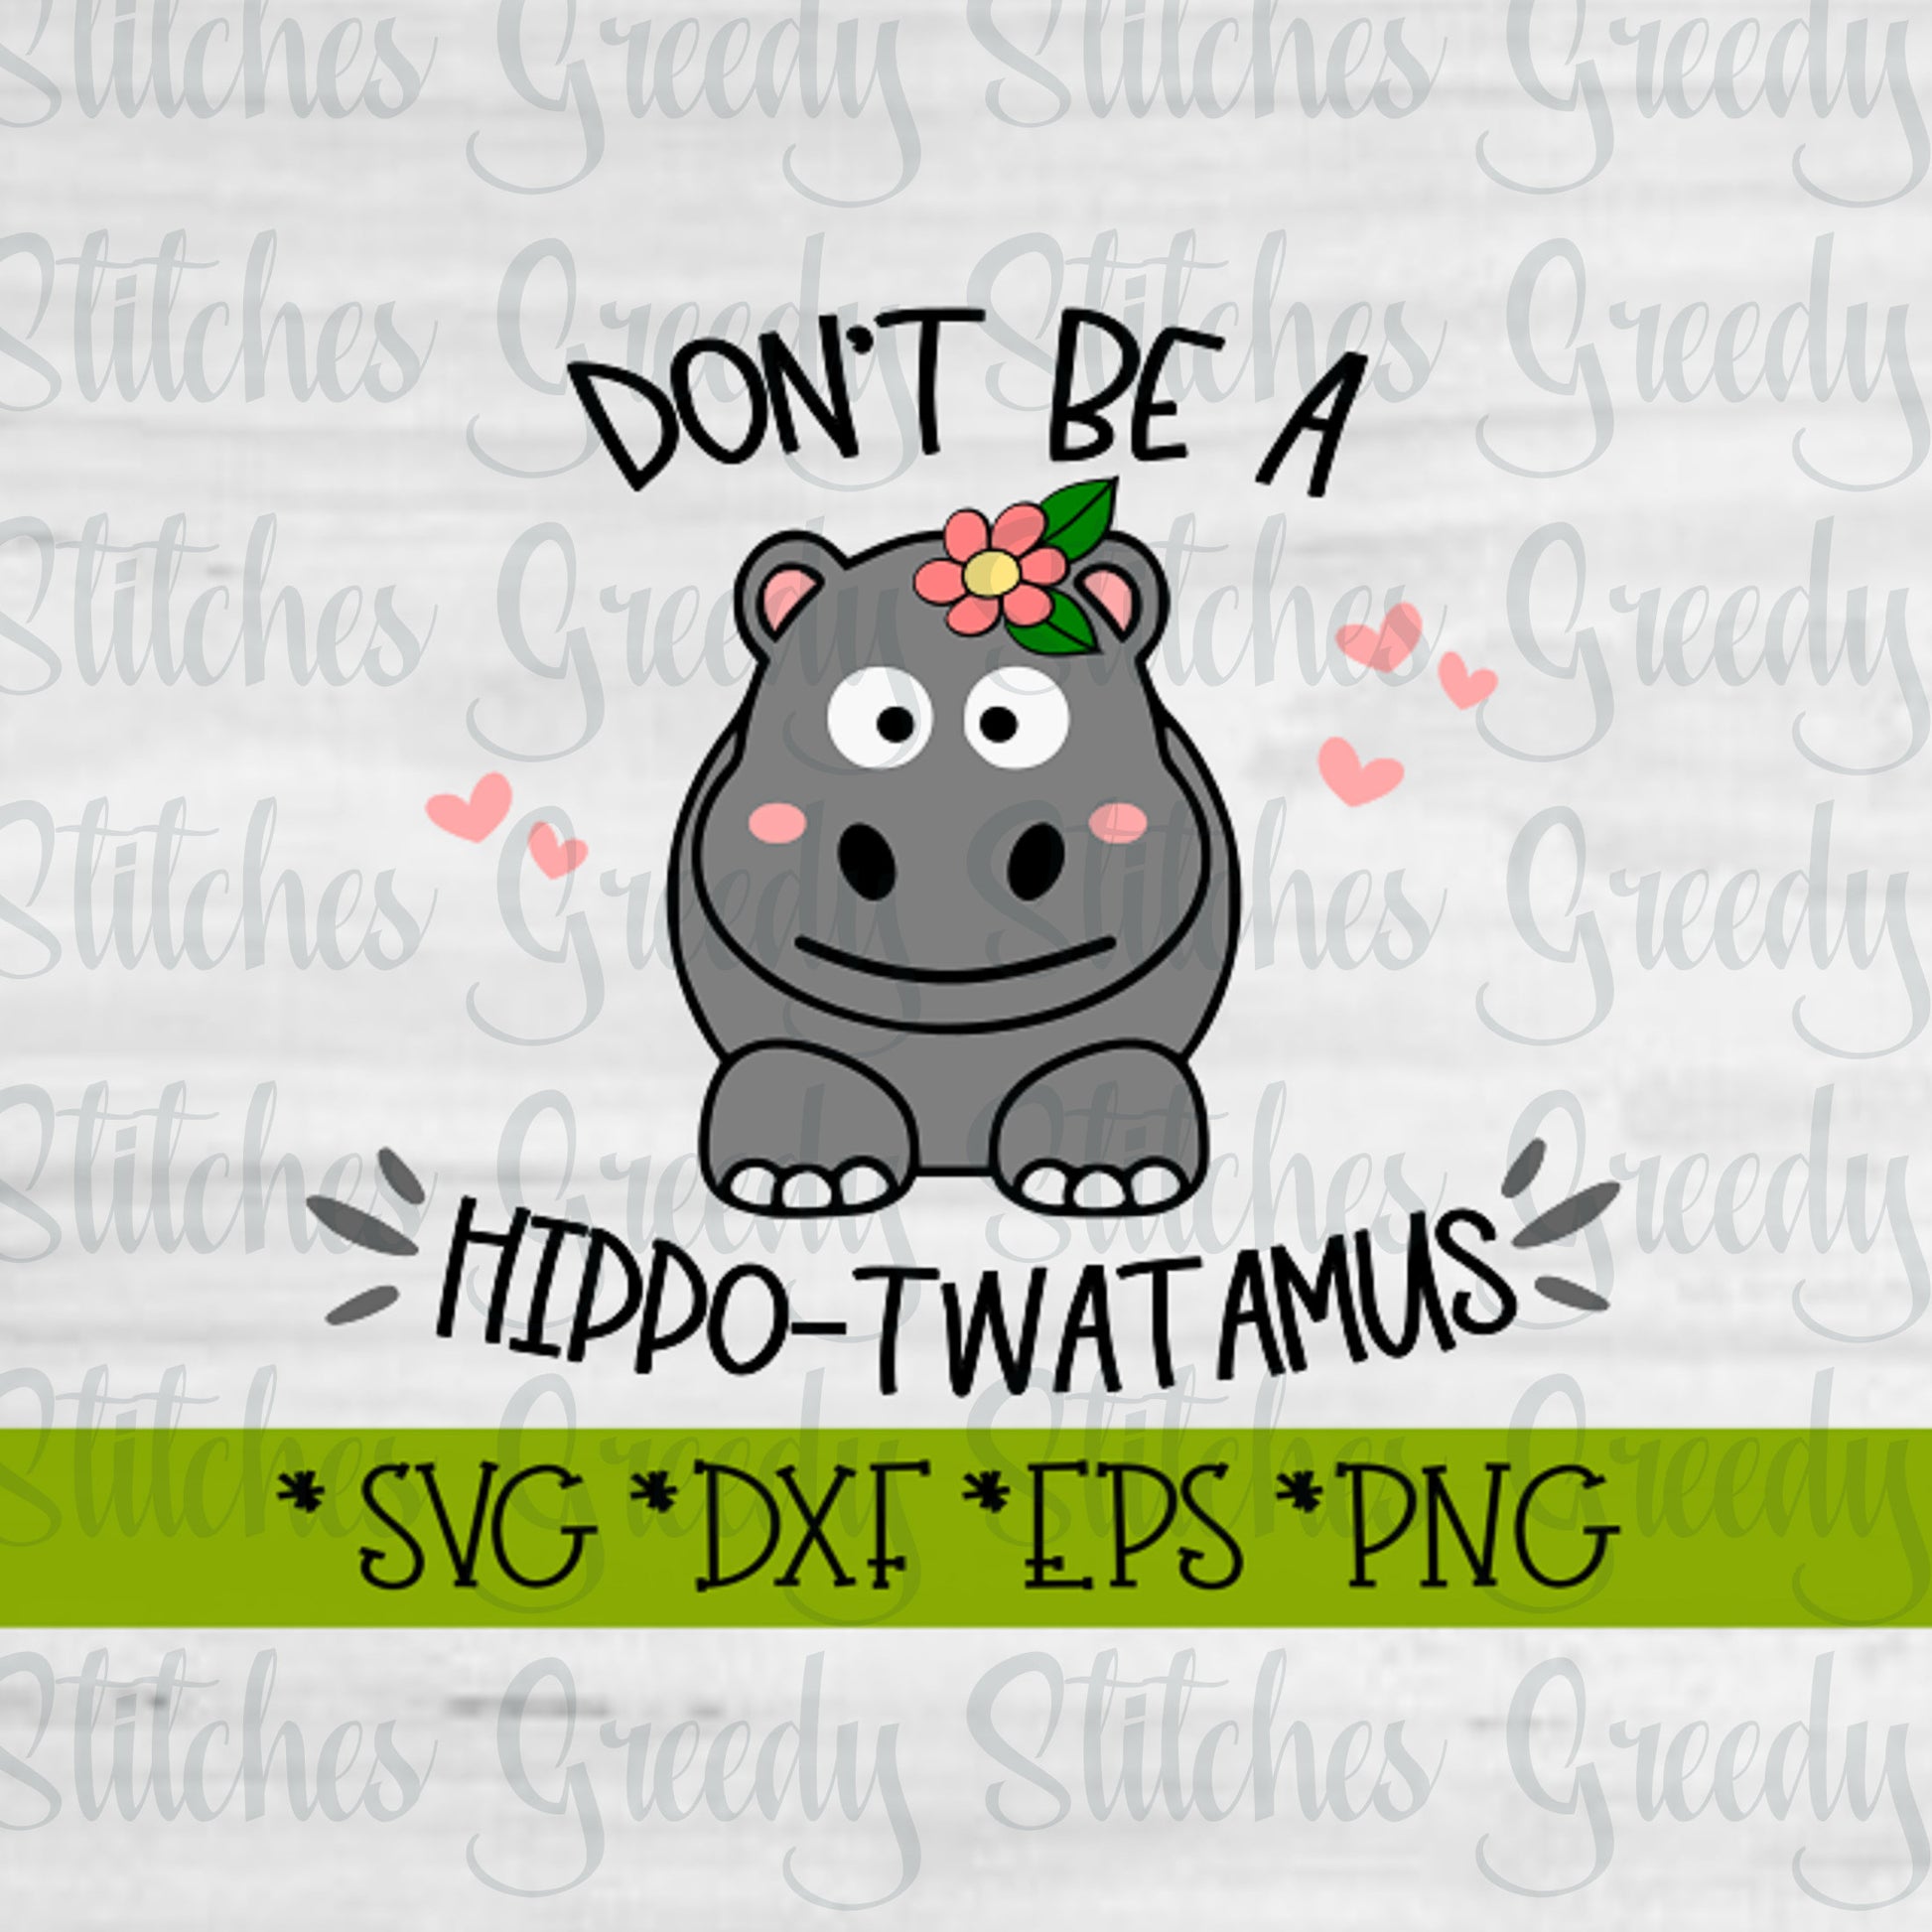 Don&#39;t Be A Hippo-Twatamus SvG, DxF, EpS, PnG, JpG.  Twat SvG | Hippo-Twatamus SvG | Twatamus SvG | Hippo SvG | Instant Download Cut Files.